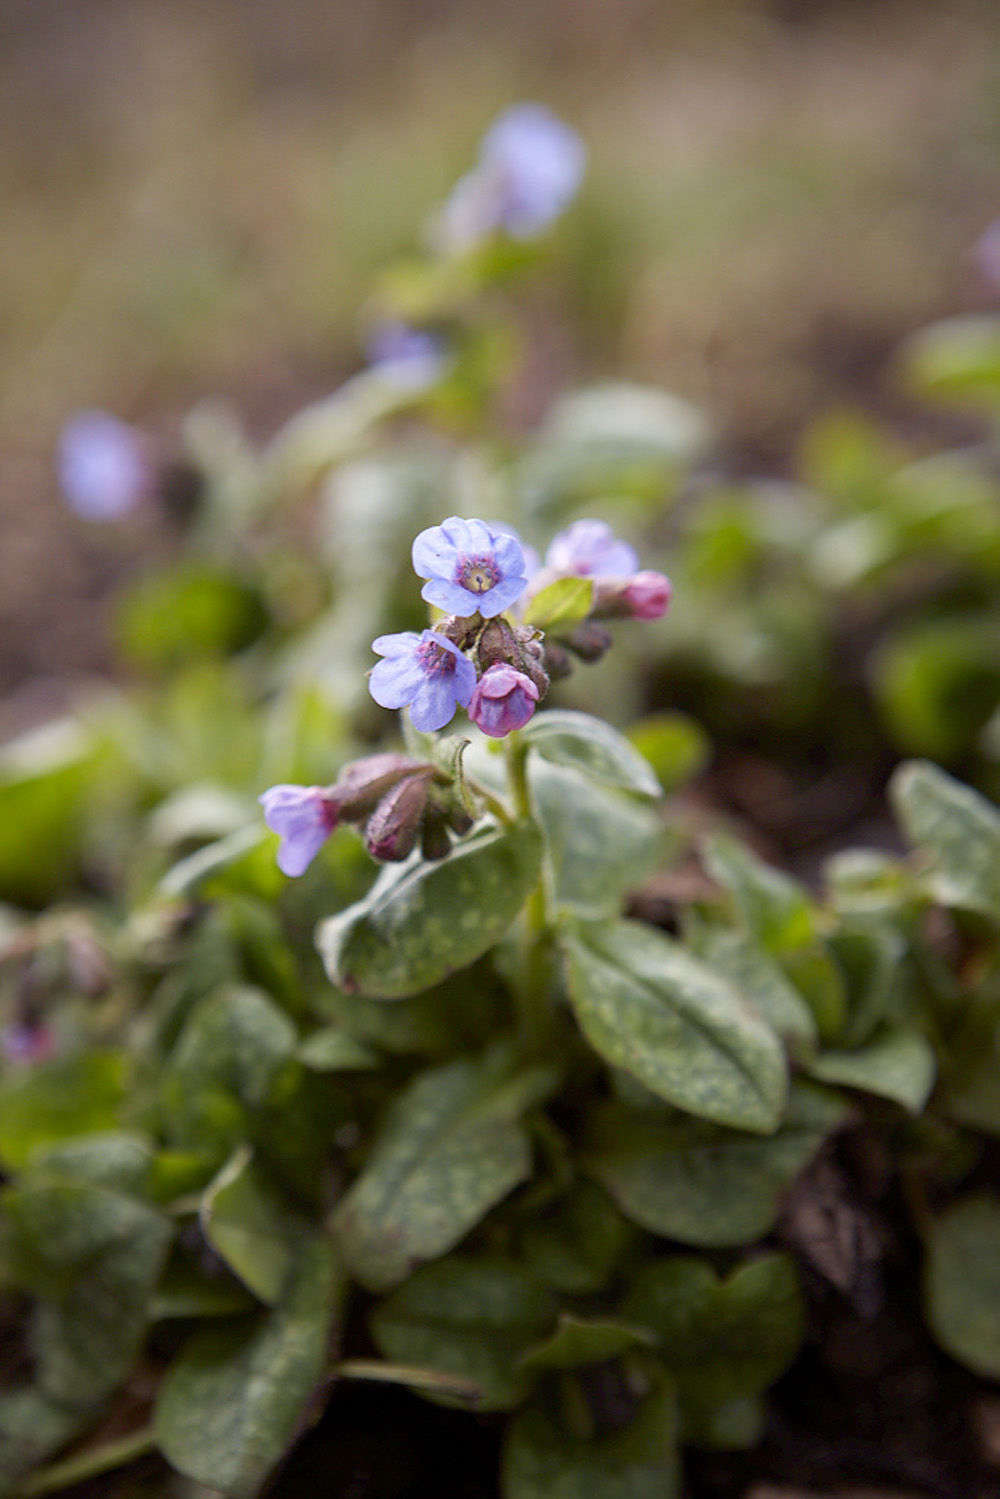 How To Grow And Care For Lungwort